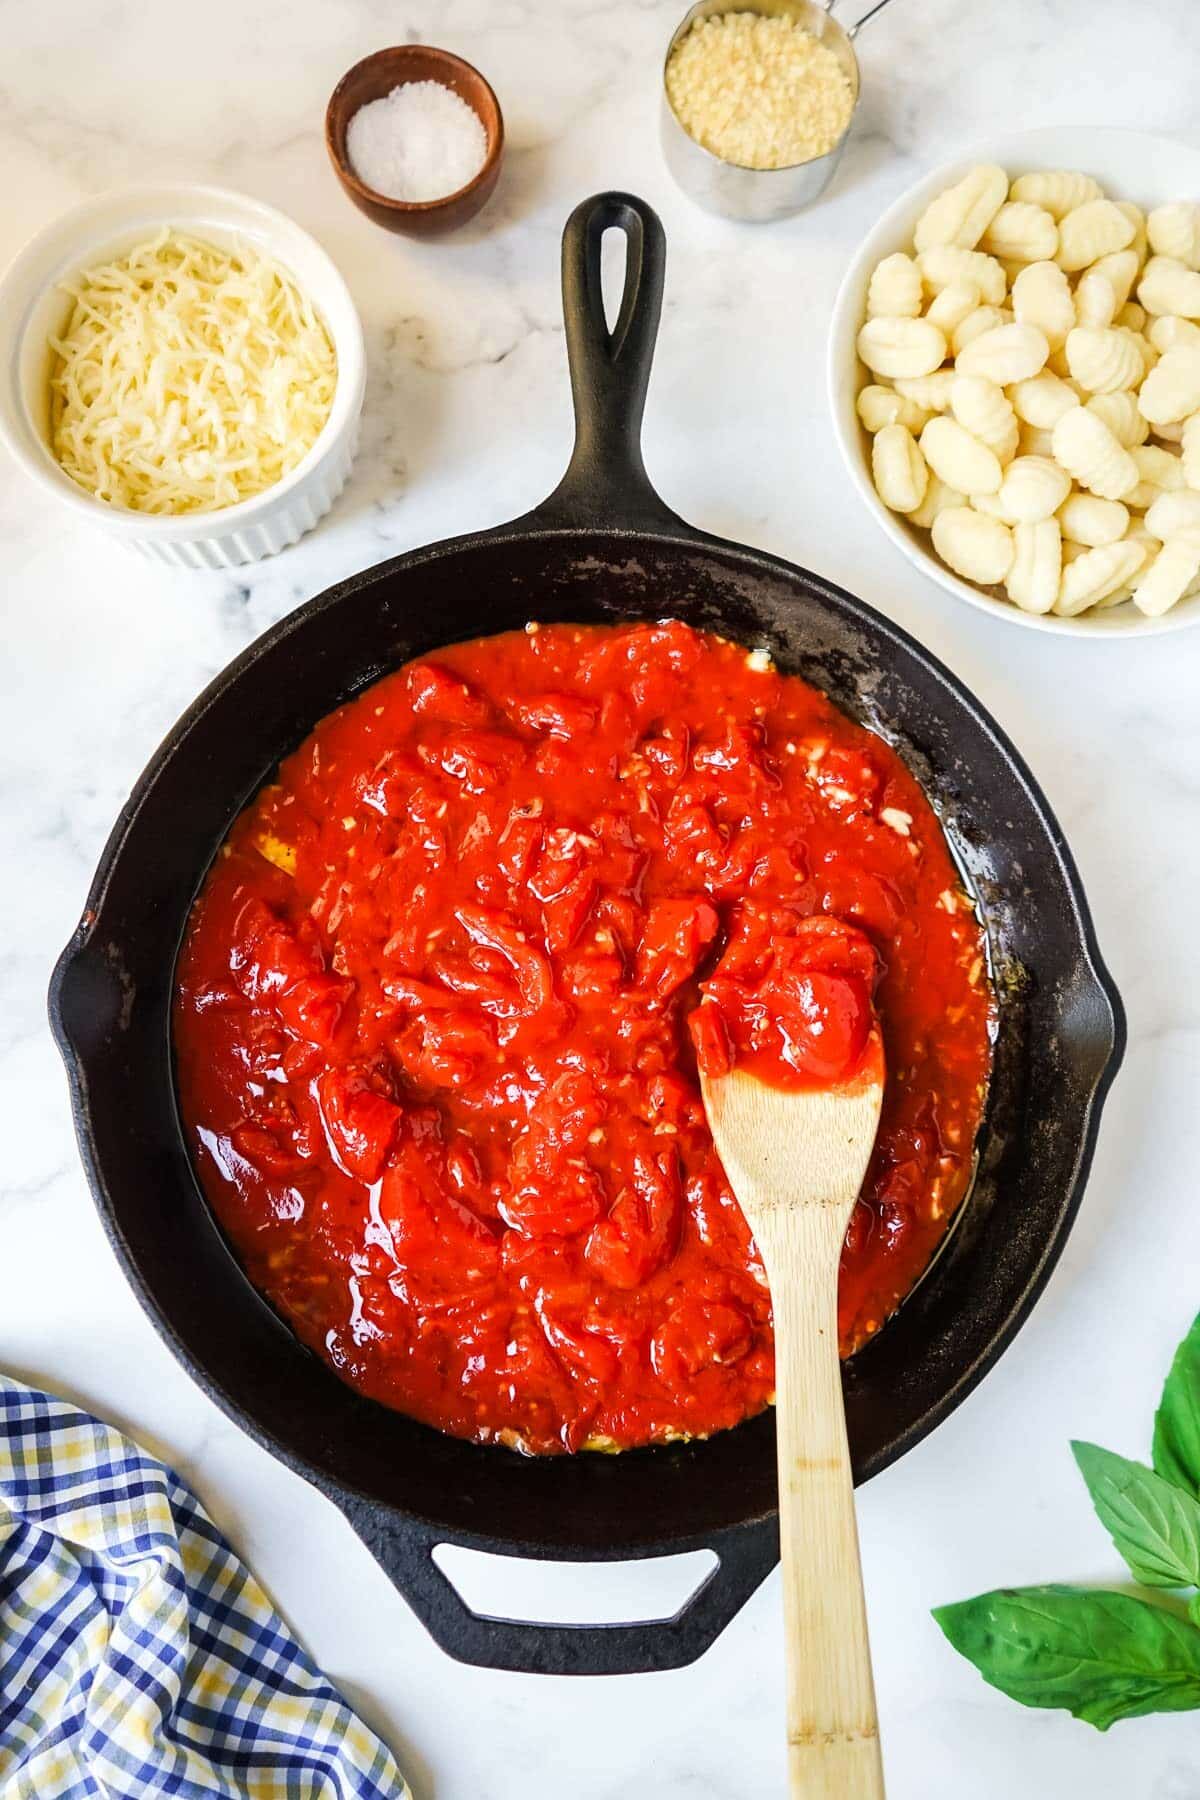 San Marzano tomatoes being added to the skillet with a wooden spoon.